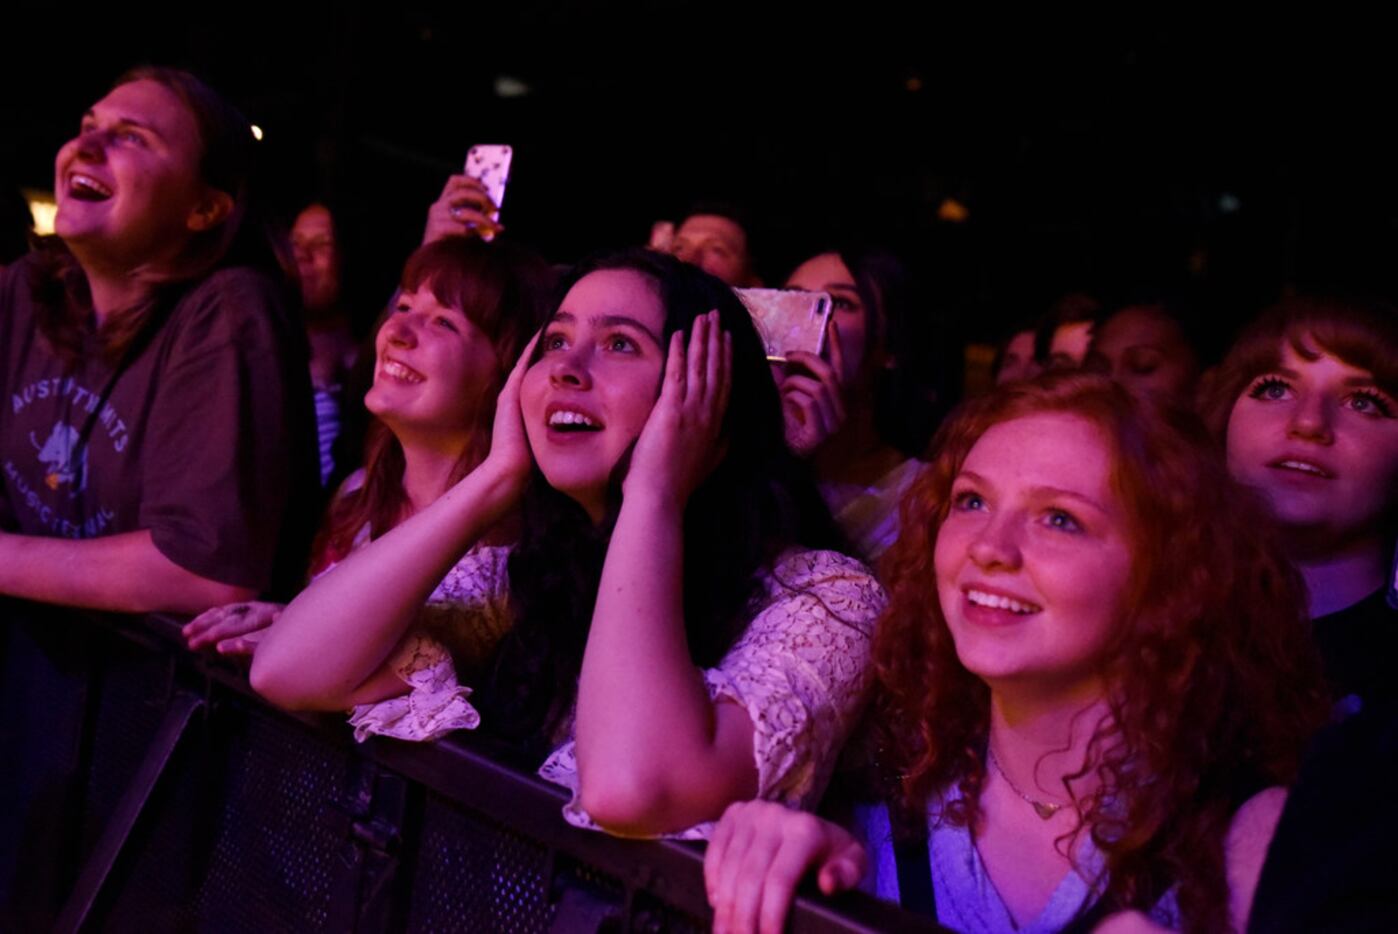 Fans react while watching singer-song writer Hozier perform at the Southside Ballroom in...